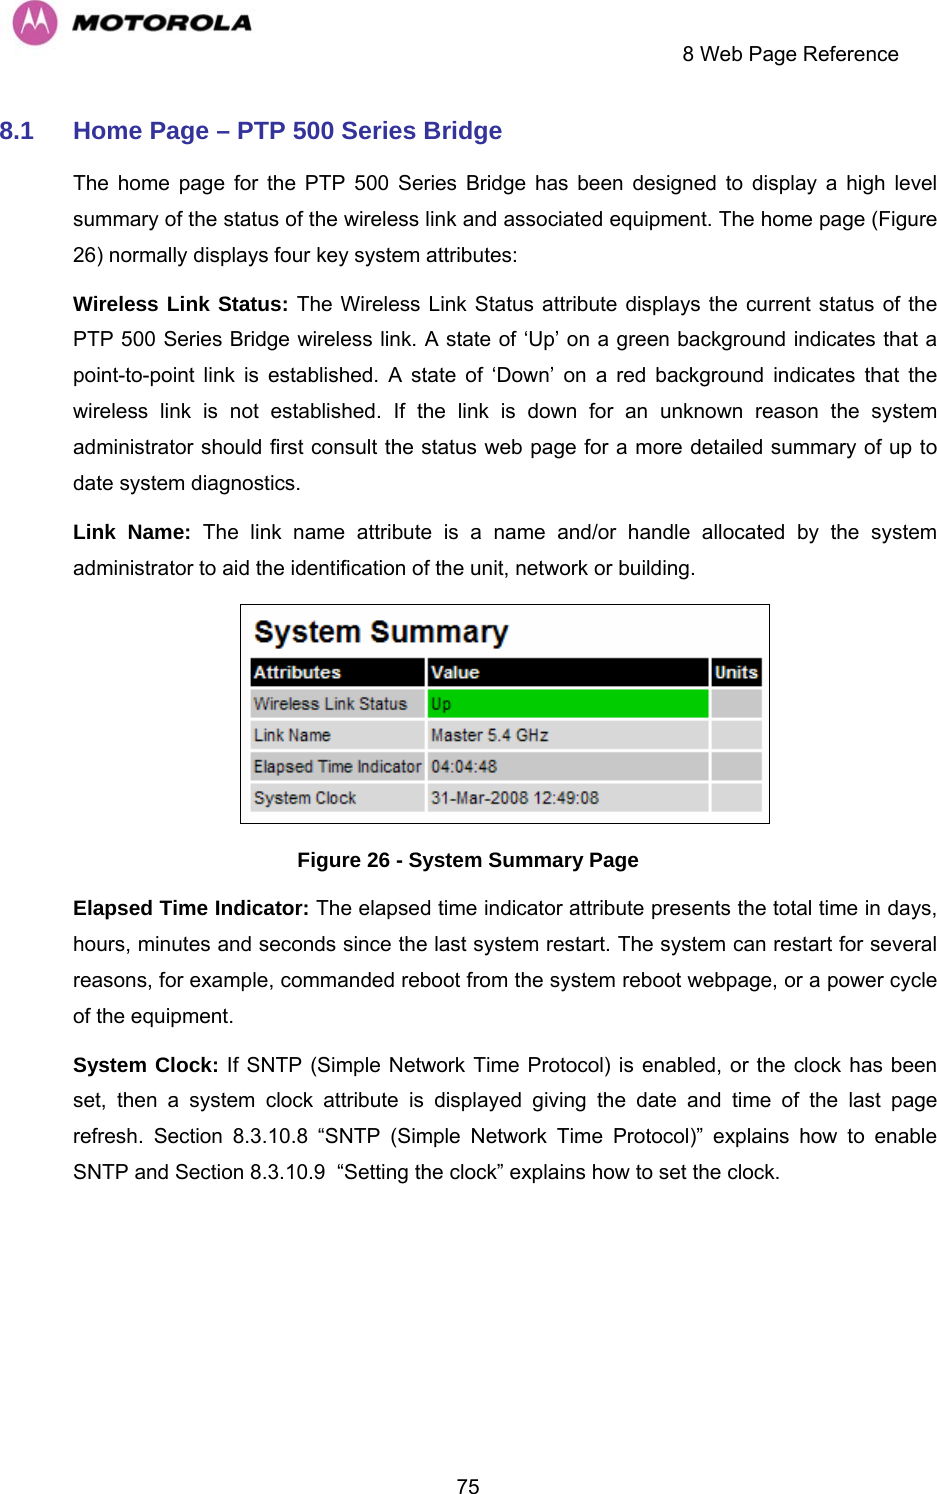     8 Web Page Reference  758.1  Home Page – PTP 500 Series Bridge  The home page for the PTP 500 Series Bridge has been designed to display a high level summary of the status of the wireless link and associated equipment. The home page (Figure 26) normally displays four key system attributes: Wireless Link Status: The Wireless Link Status attribute displays the current status of the PTP 500 Series Bridge wireless link. A state of ‘Up’ on a green background indicates that a point-to-point link is established. A state of ‘Down’ on a red background indicates that the wireless link is not established. If the link is down for an unknown reason the system administrator should first consult the status web page for a more detailed summary of up to date system diagnostics.  Link Name: The link name attribute is a name and/or handle allocated by the system administrator to aid the identification of the unit, network or building.   Figure 26 - System Summary Page Elapsed Time Indicator: The elapsed time indicator attribute presents the total time in days, hours, minutes and seconds since the last system restart. The system can restart for several reasons, for example, commanded reboot from the system reboot webpage, or a power cycle of the equipment.  System Clock: If SNTP (Simple Network Time Protocol) is enabled, or the clock has been set, then a system clock attribute is displayed giving the date and time of the last page refresh. Section 8.3.10.8 “SNTP (Simple Network Time Protocol)” explains how to enable SNTP and Section 8.3.10.9  “Setting the clock” explains how to set the clock. 